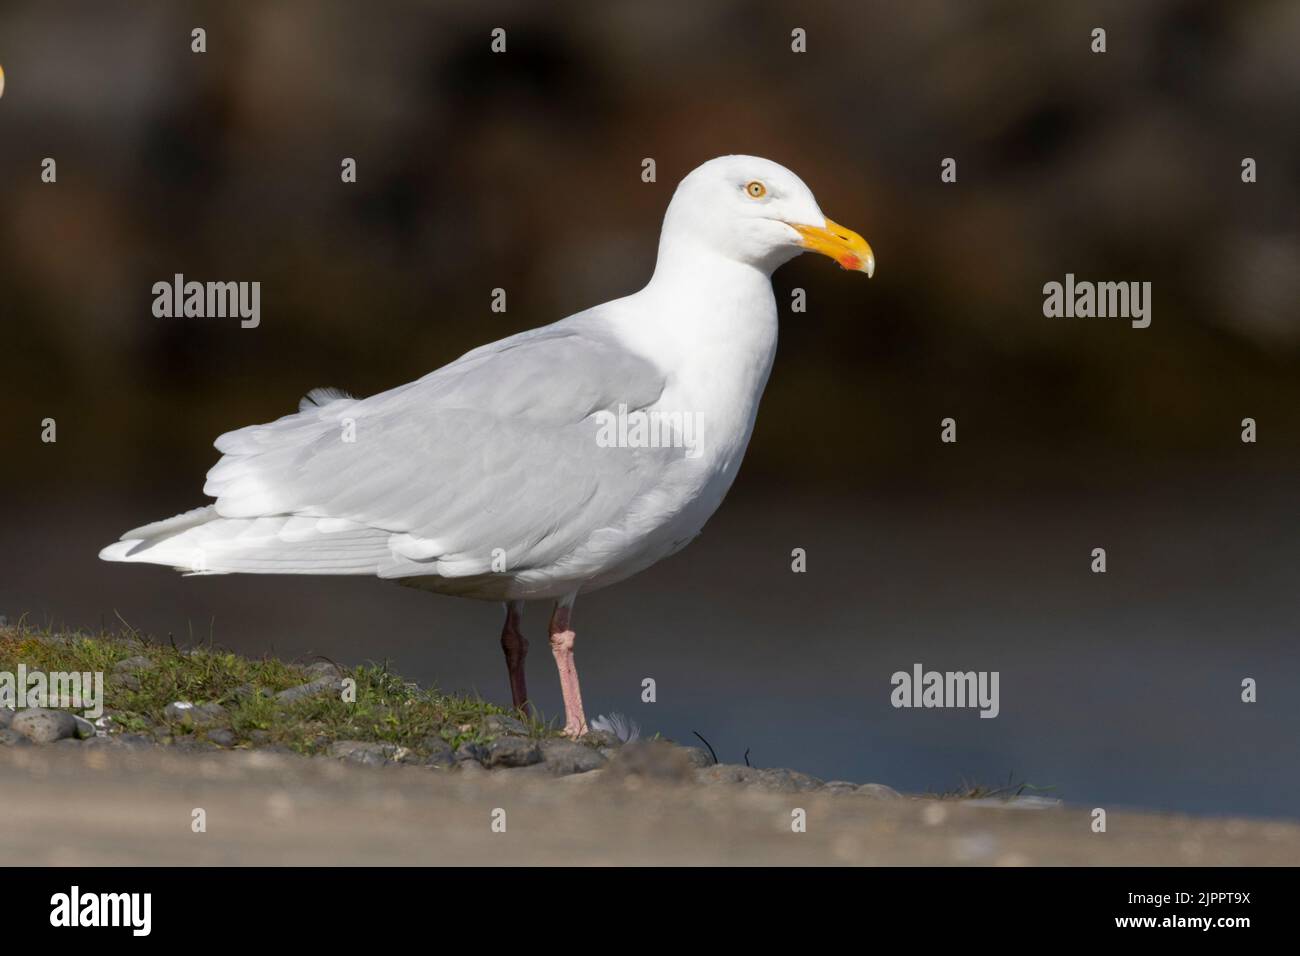 Glaucous Gull (Larus hyperboreus leuceretes), side view of an adult standing on the ground, Western Region, Iceland Stock Photo